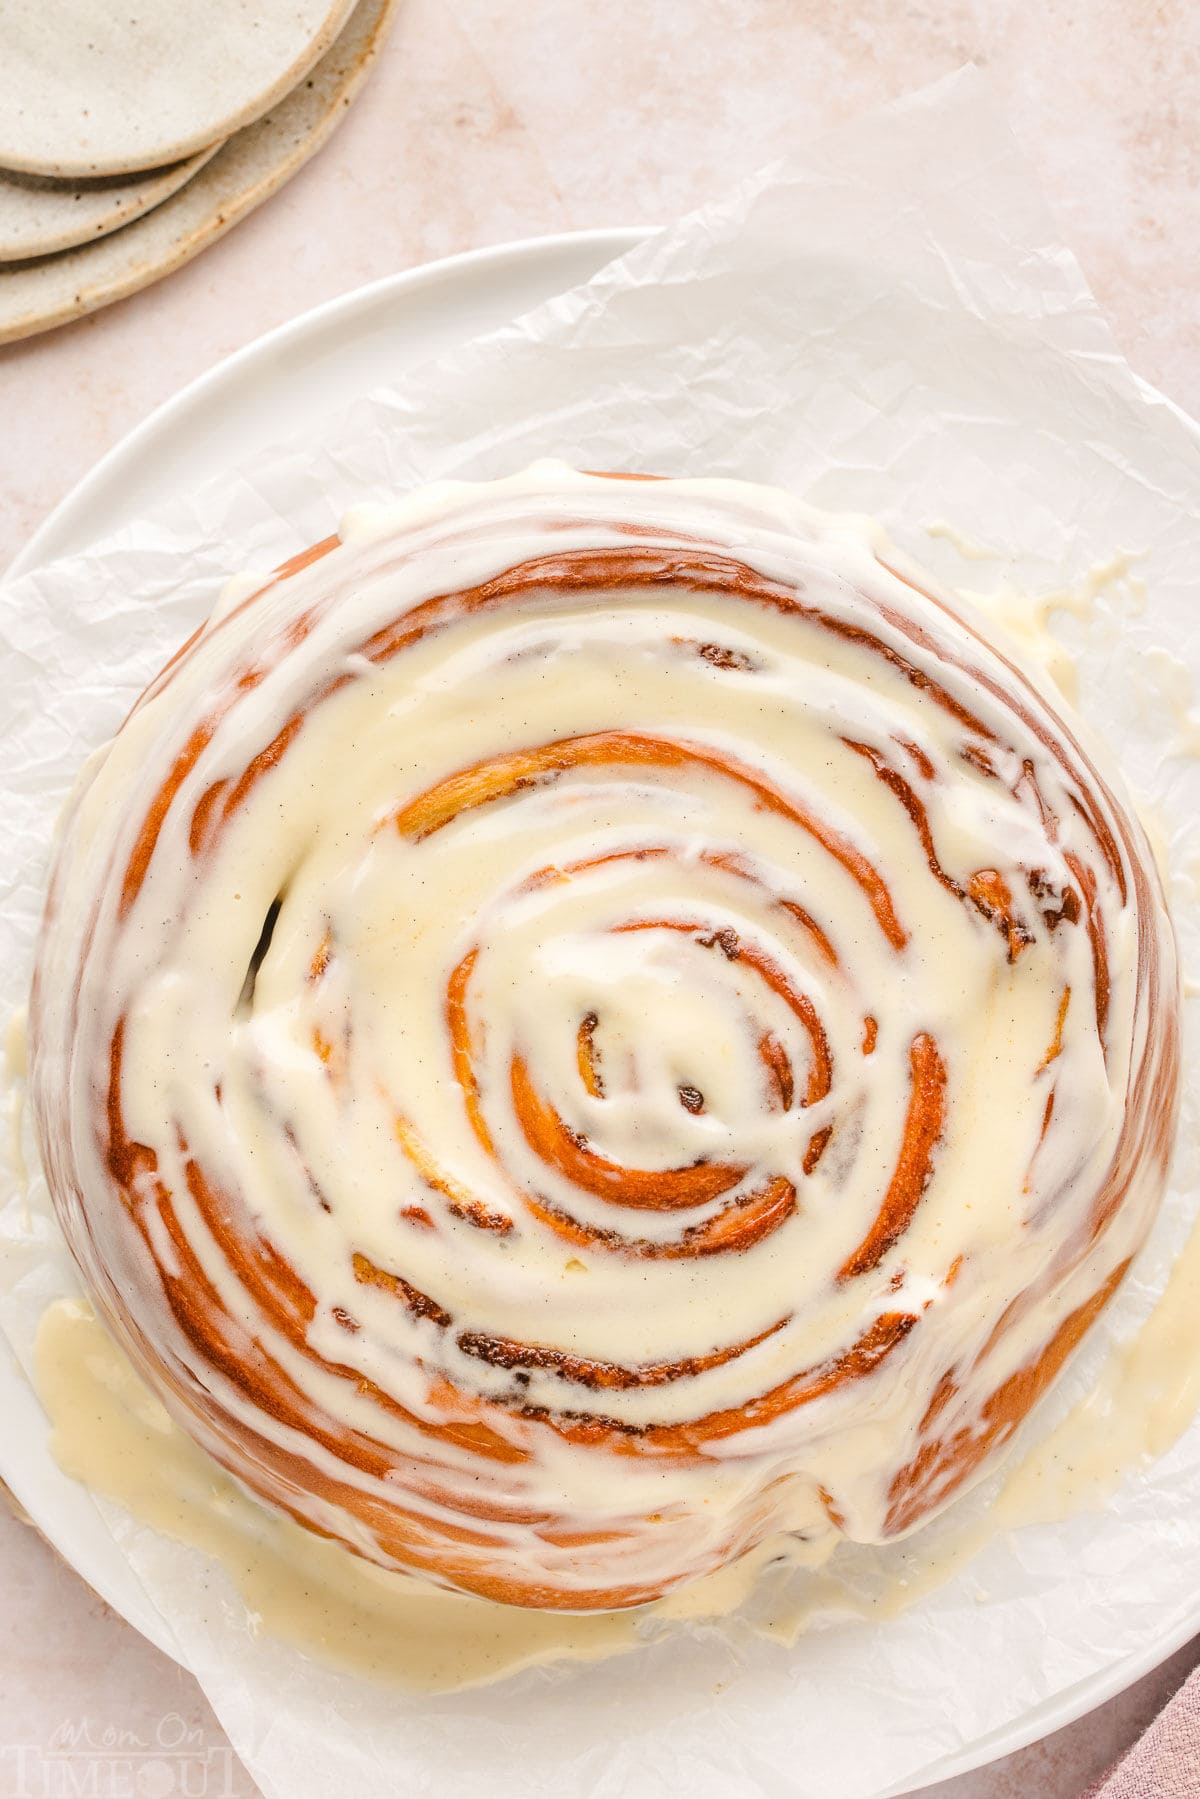 giant cinnamon roll with a cream cheese glaze sitting on white parchment with small plates to the side.